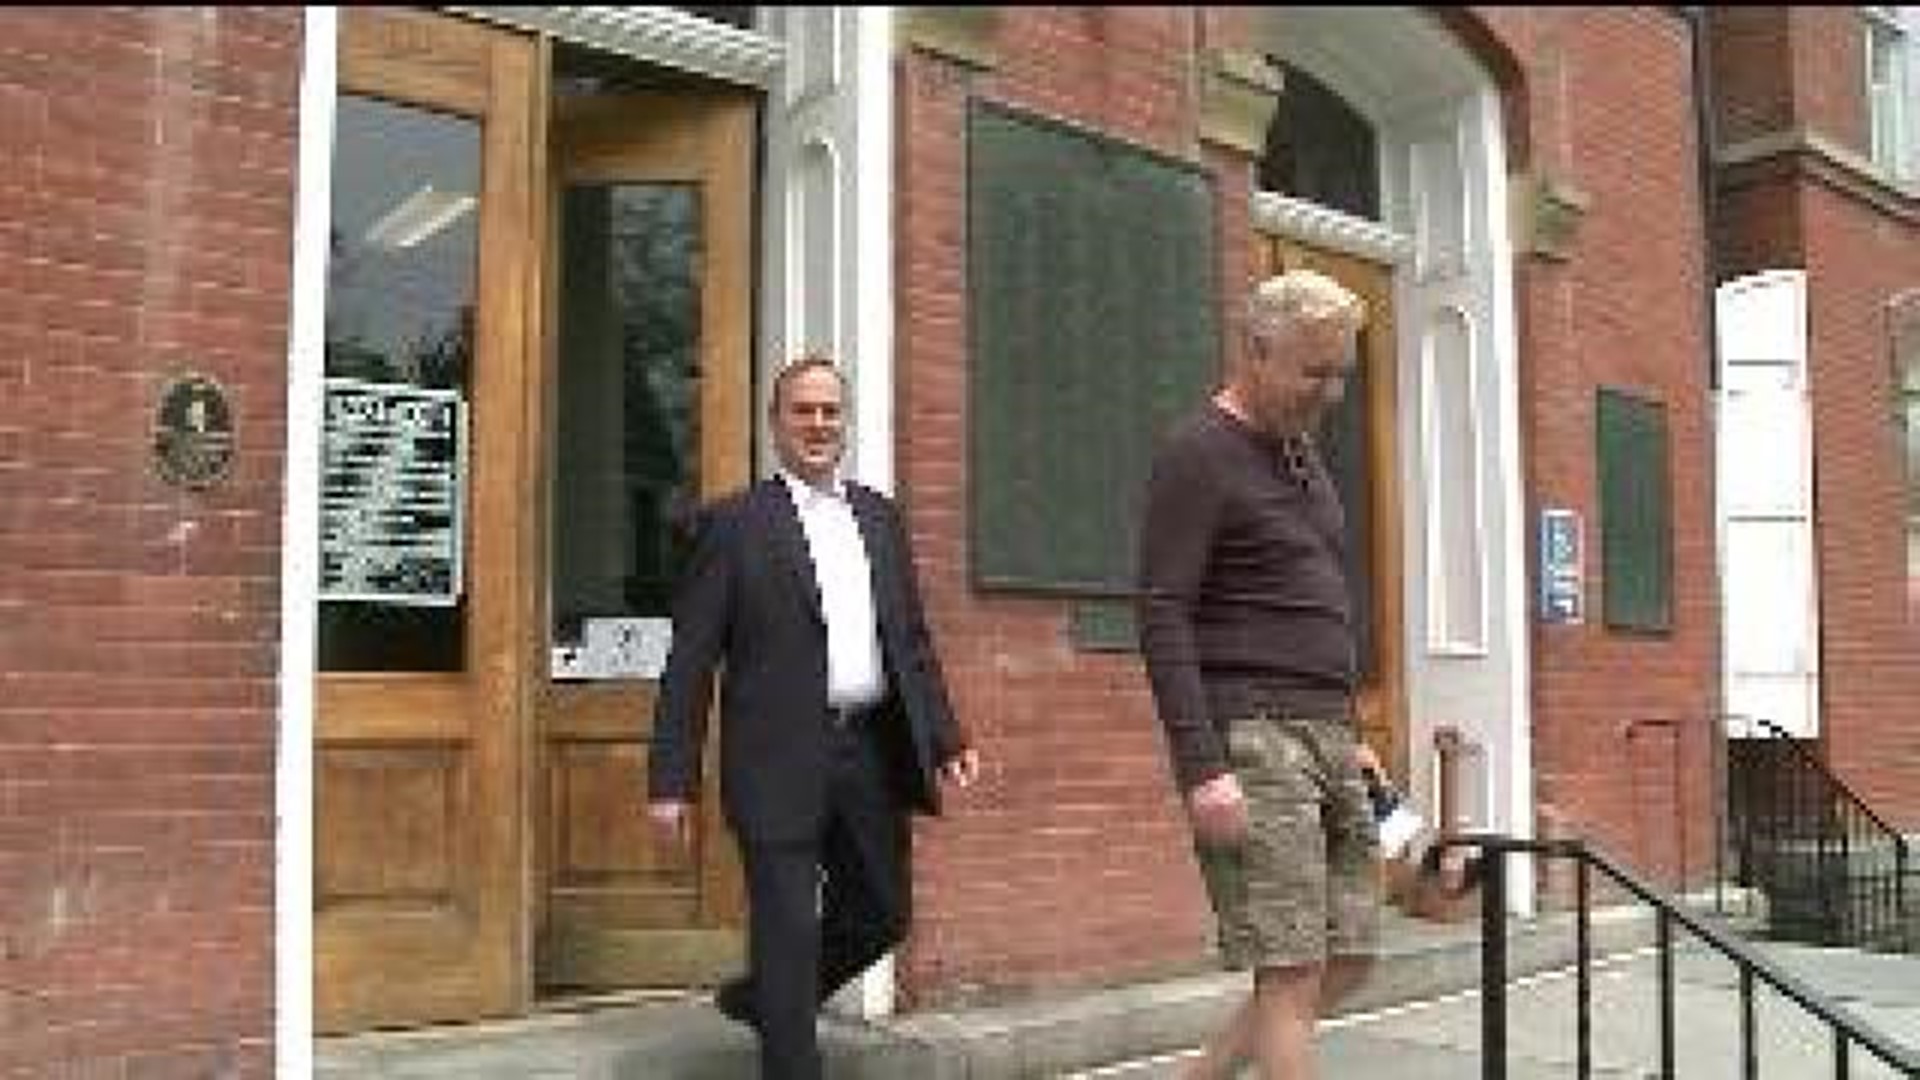 Same-Sex Couples Set to Marry in PA wnep pic